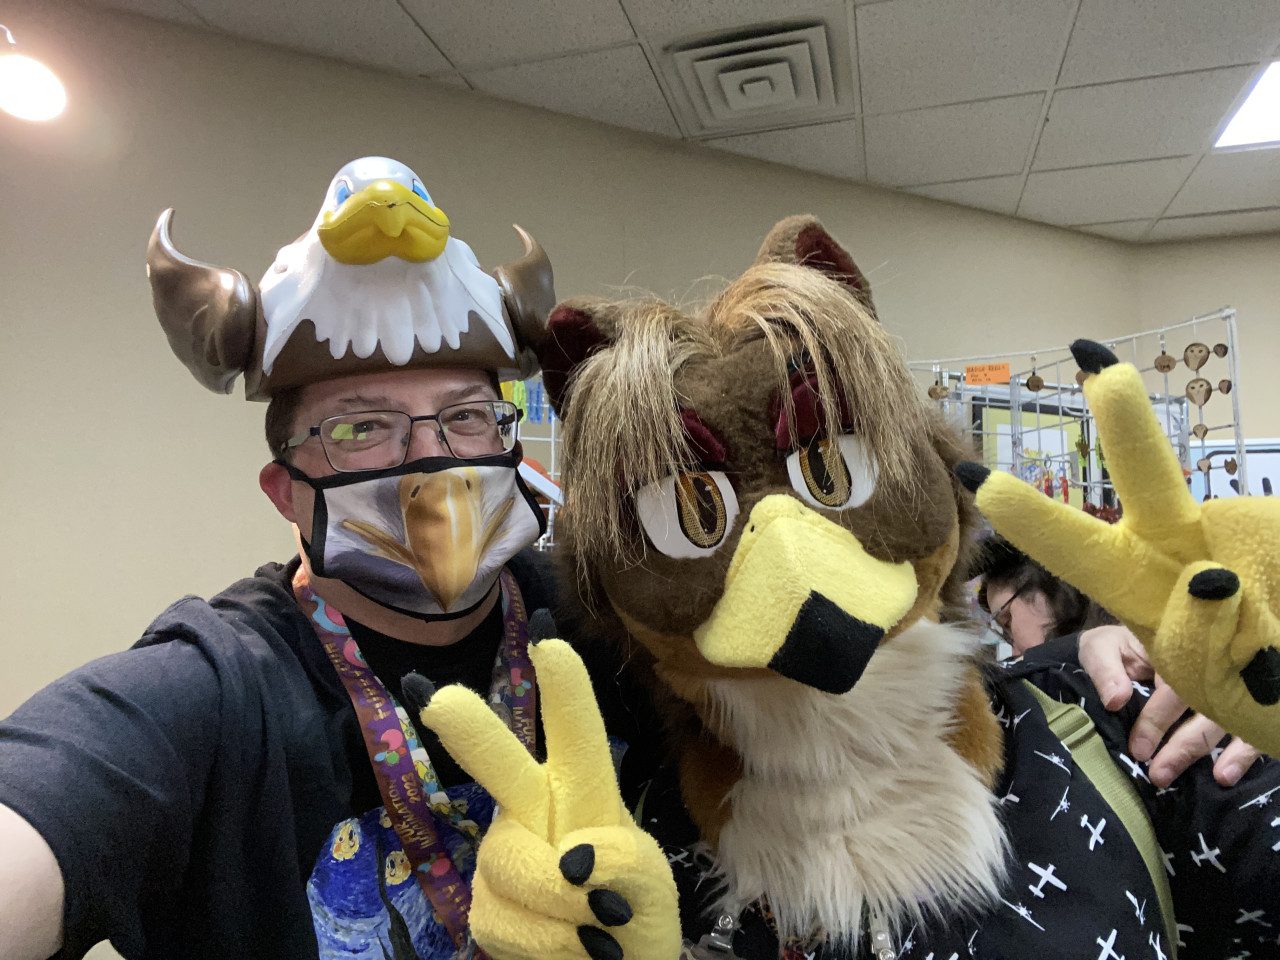 Me in a silly eagle hat posing with Horus the gryphon in fursuit.